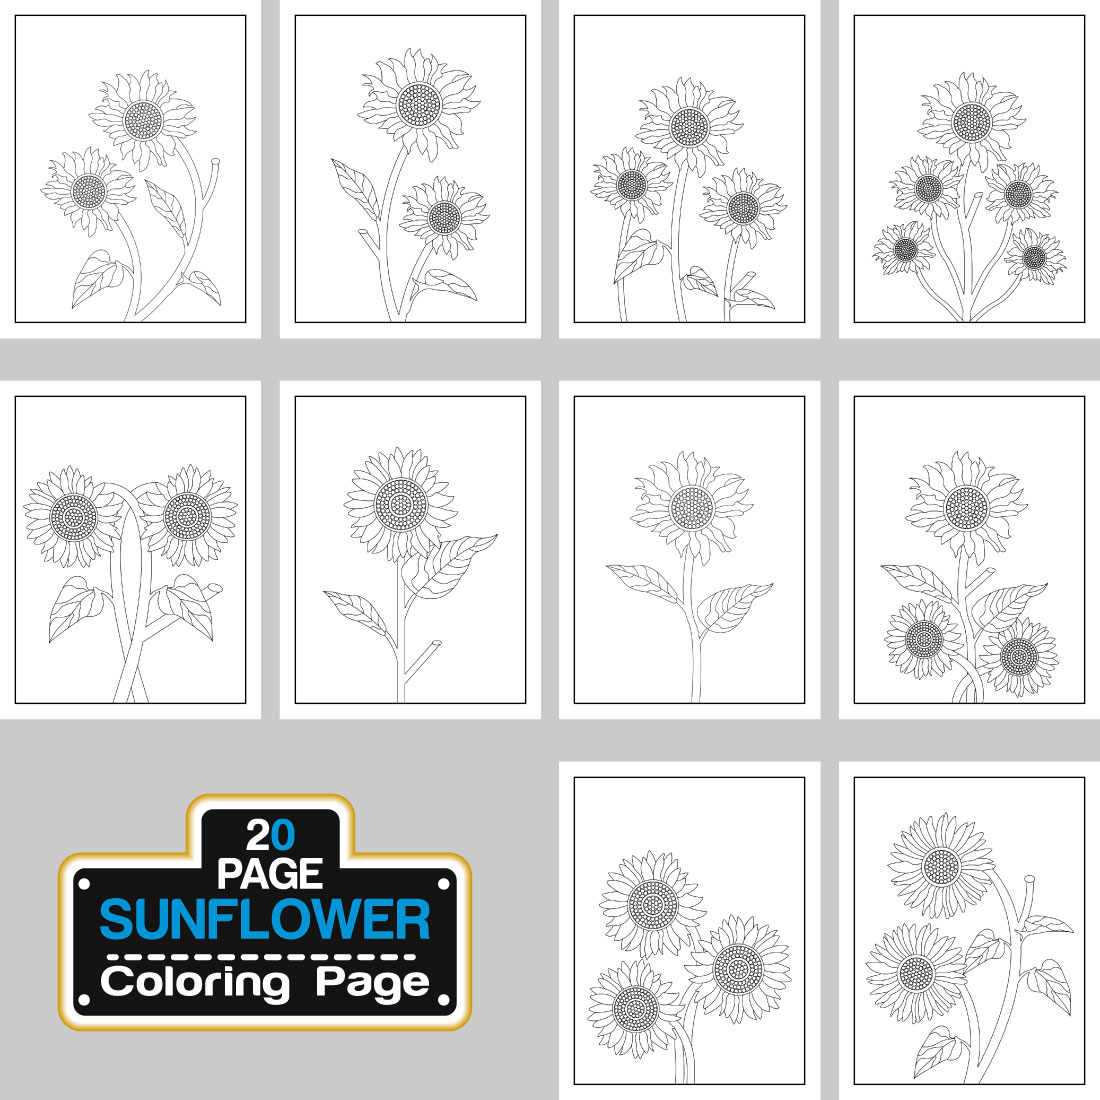 Sunflower coloring page and book hand drawn line art illustration